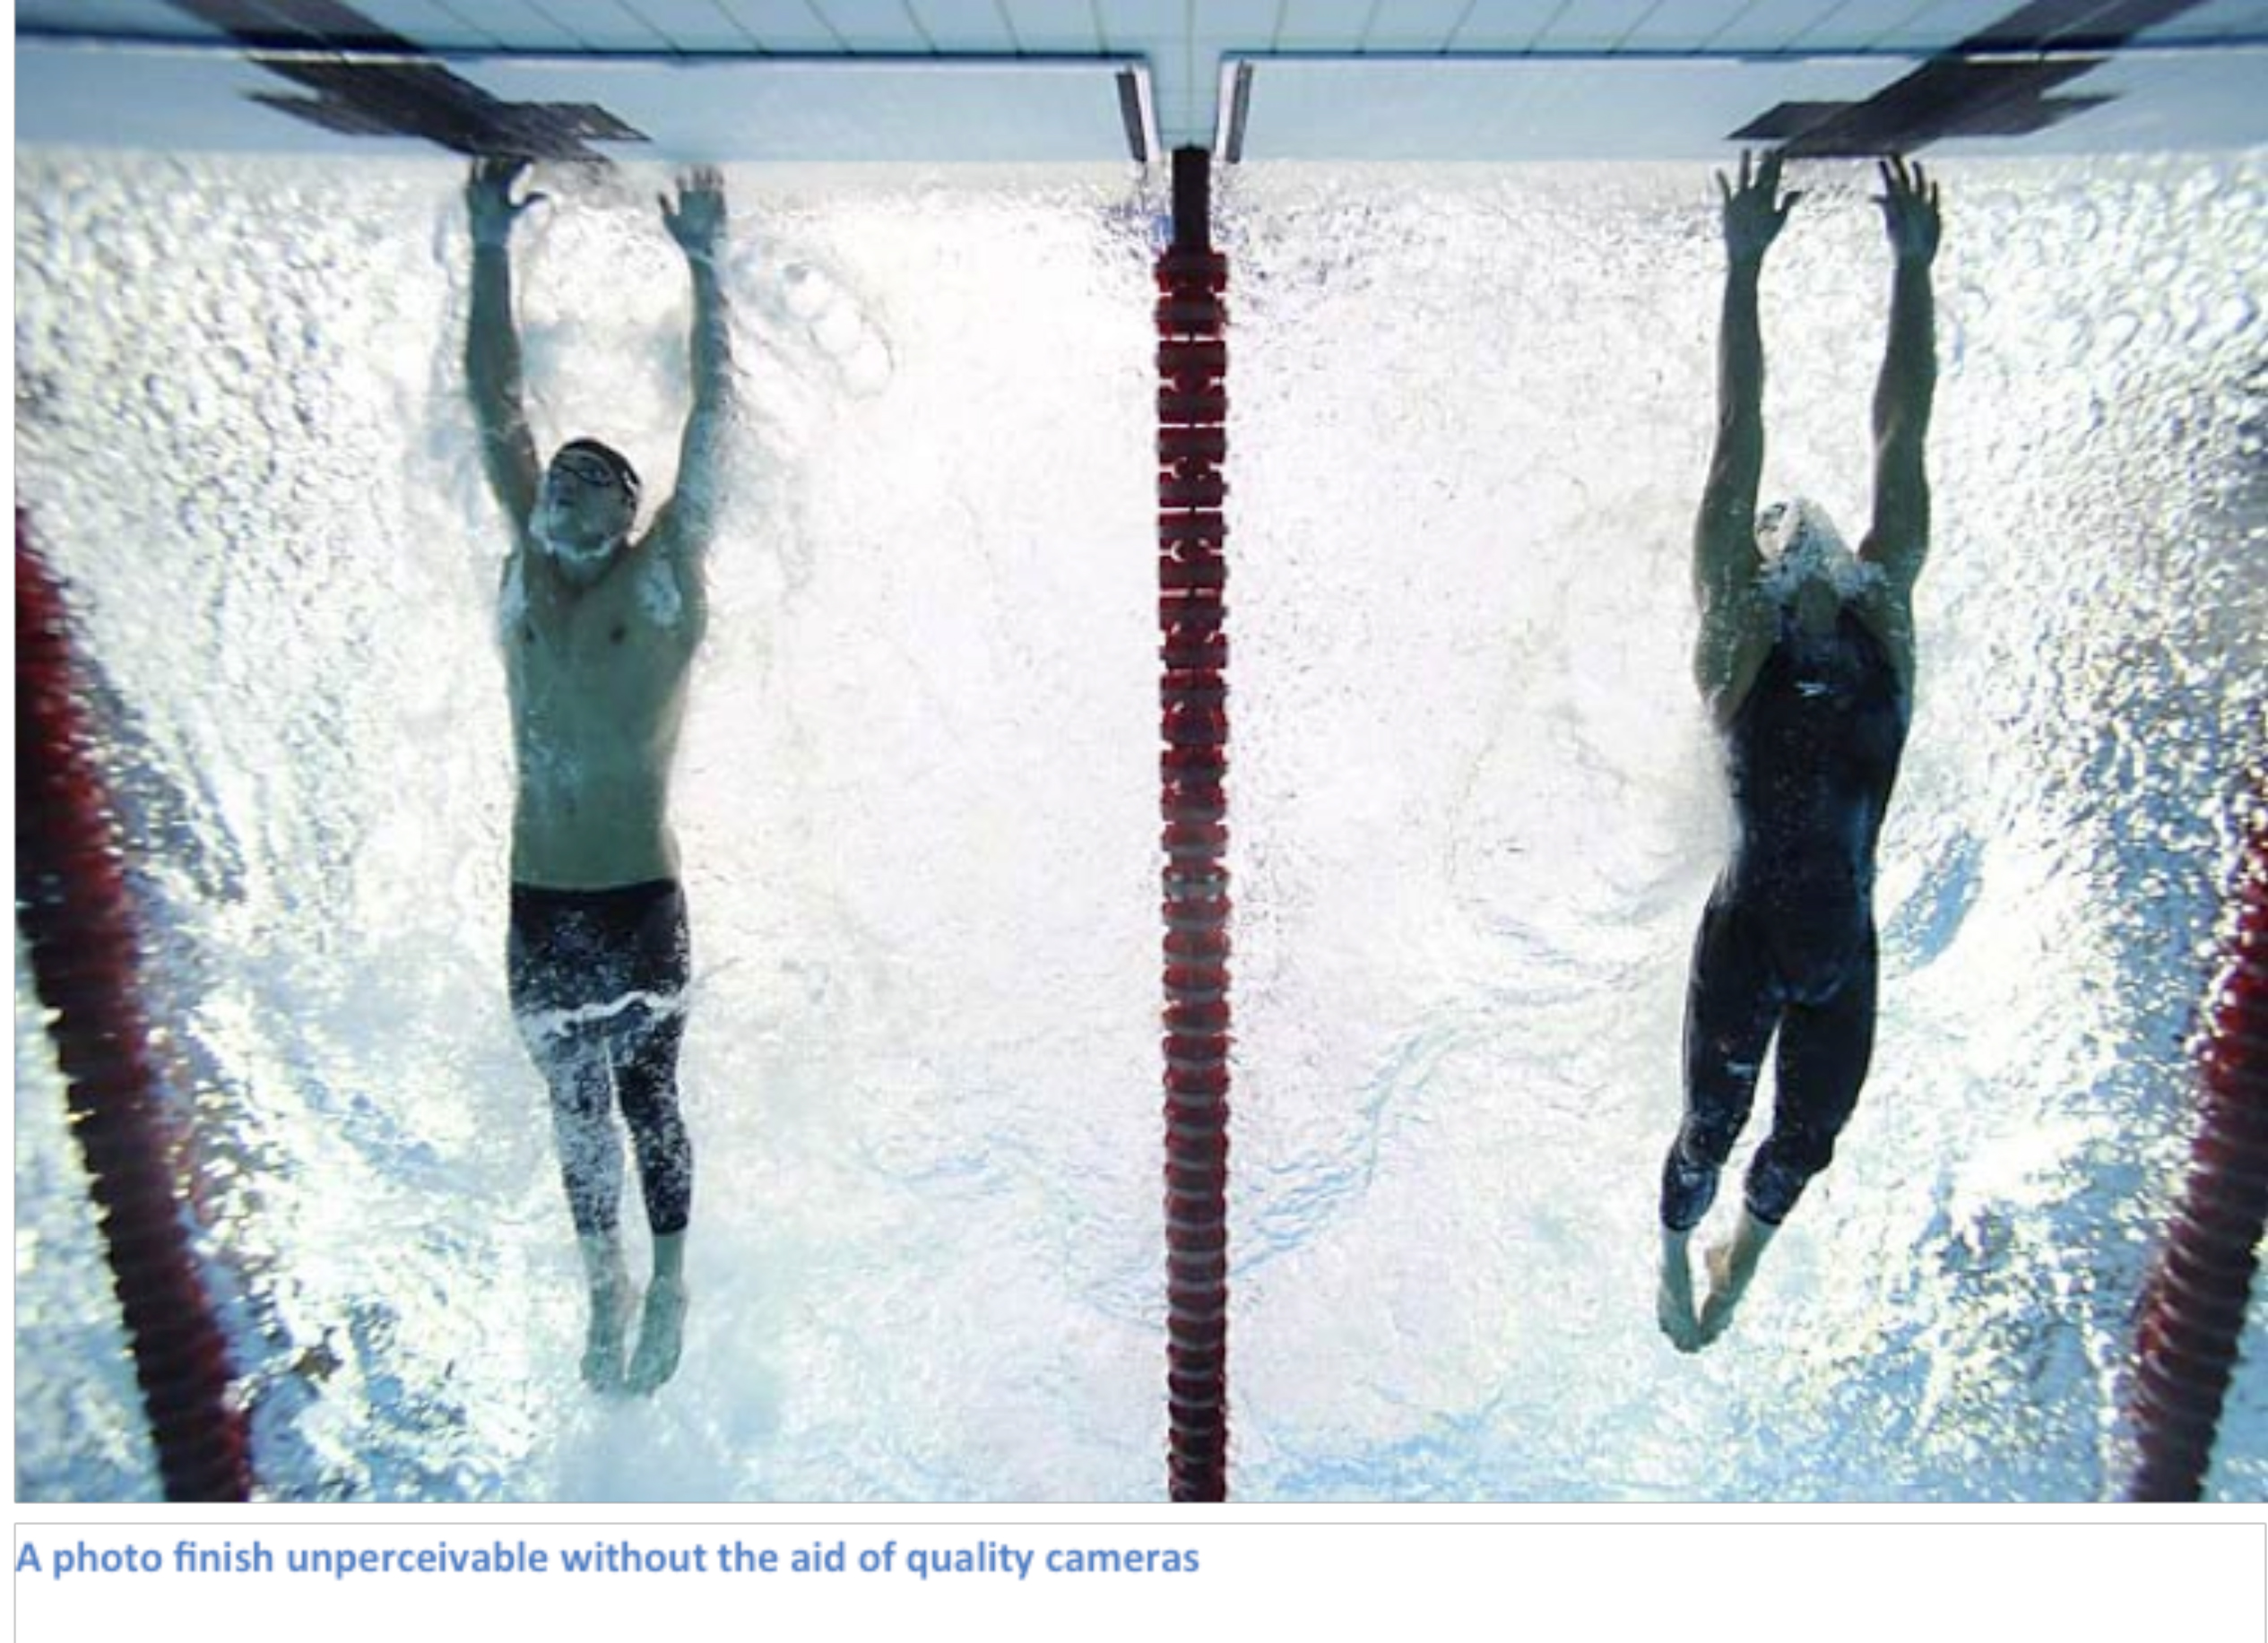 An olympic photofinish determines Michael Phelps narrowly beats Milorad Cavic--documented by a high-def camera